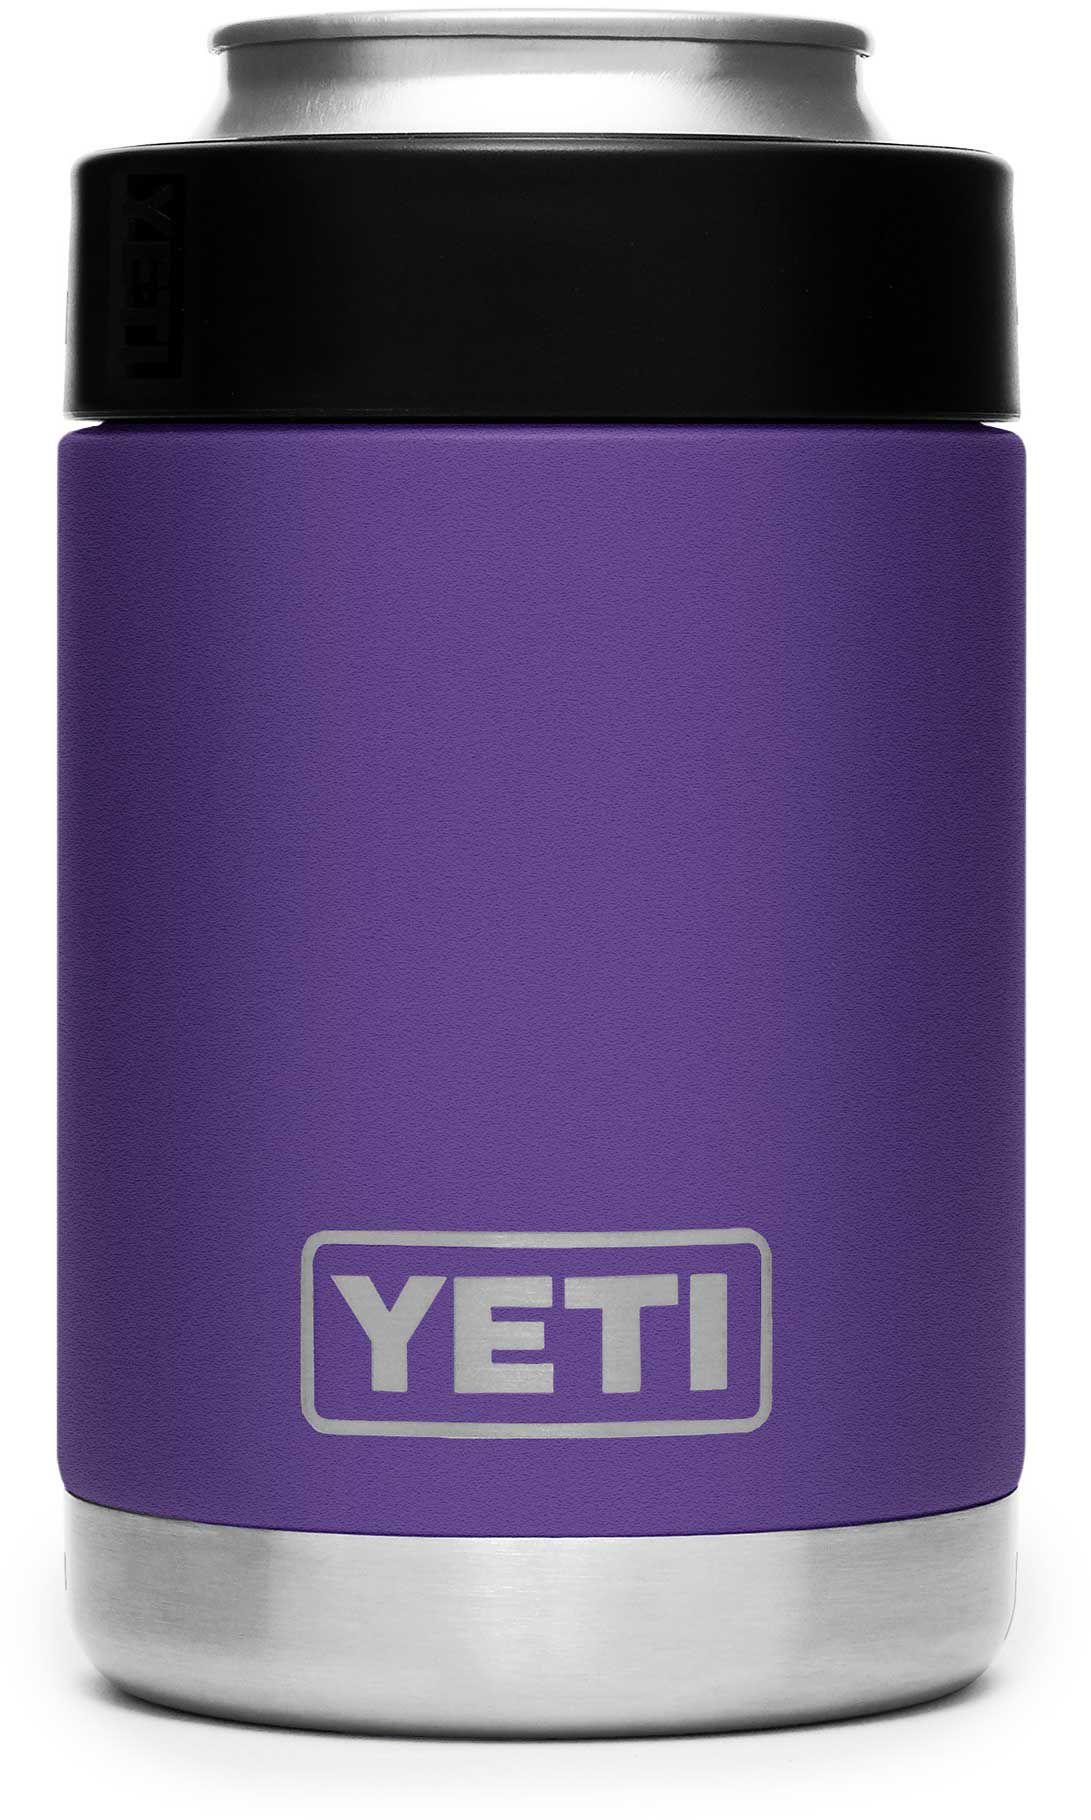 yeti beer can cooler